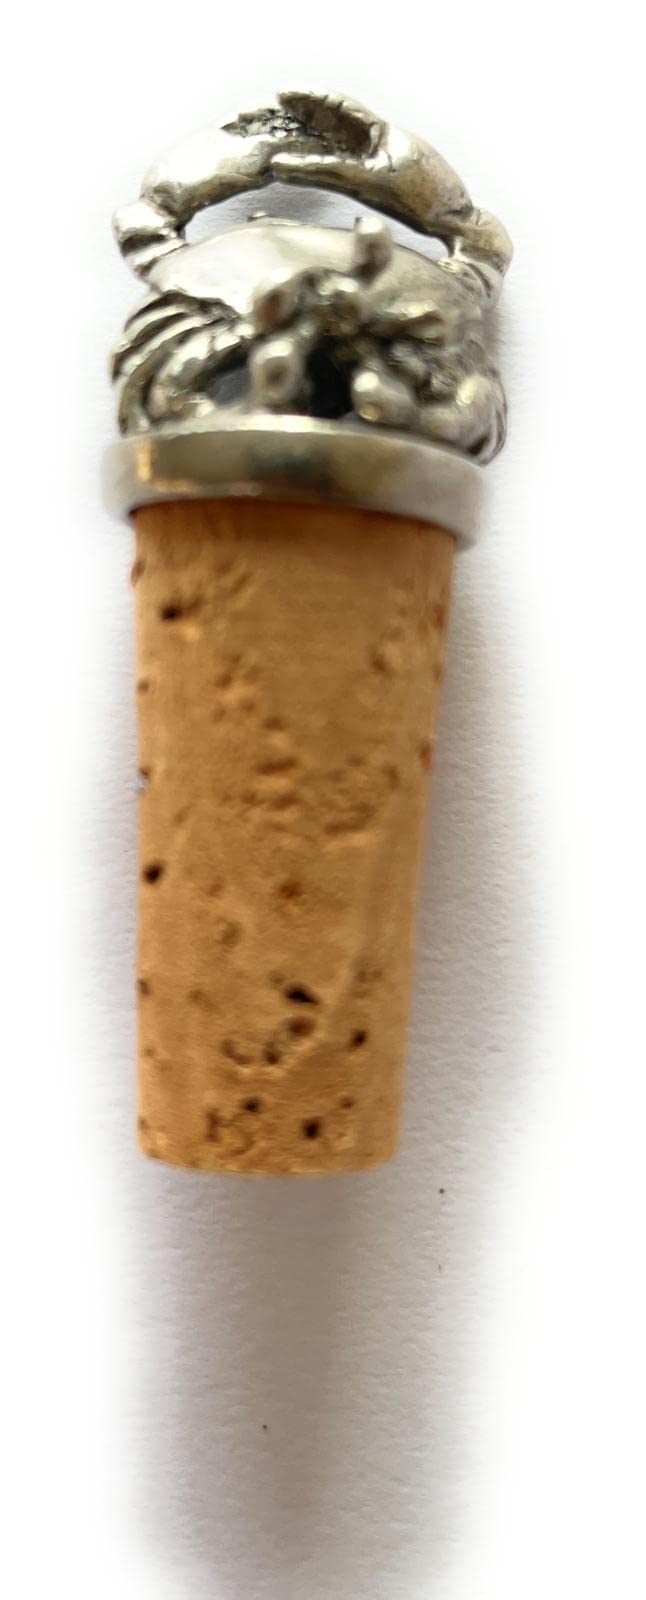 Cork Stopper with Silver Crab - Chehoma - 6cm x 3cm